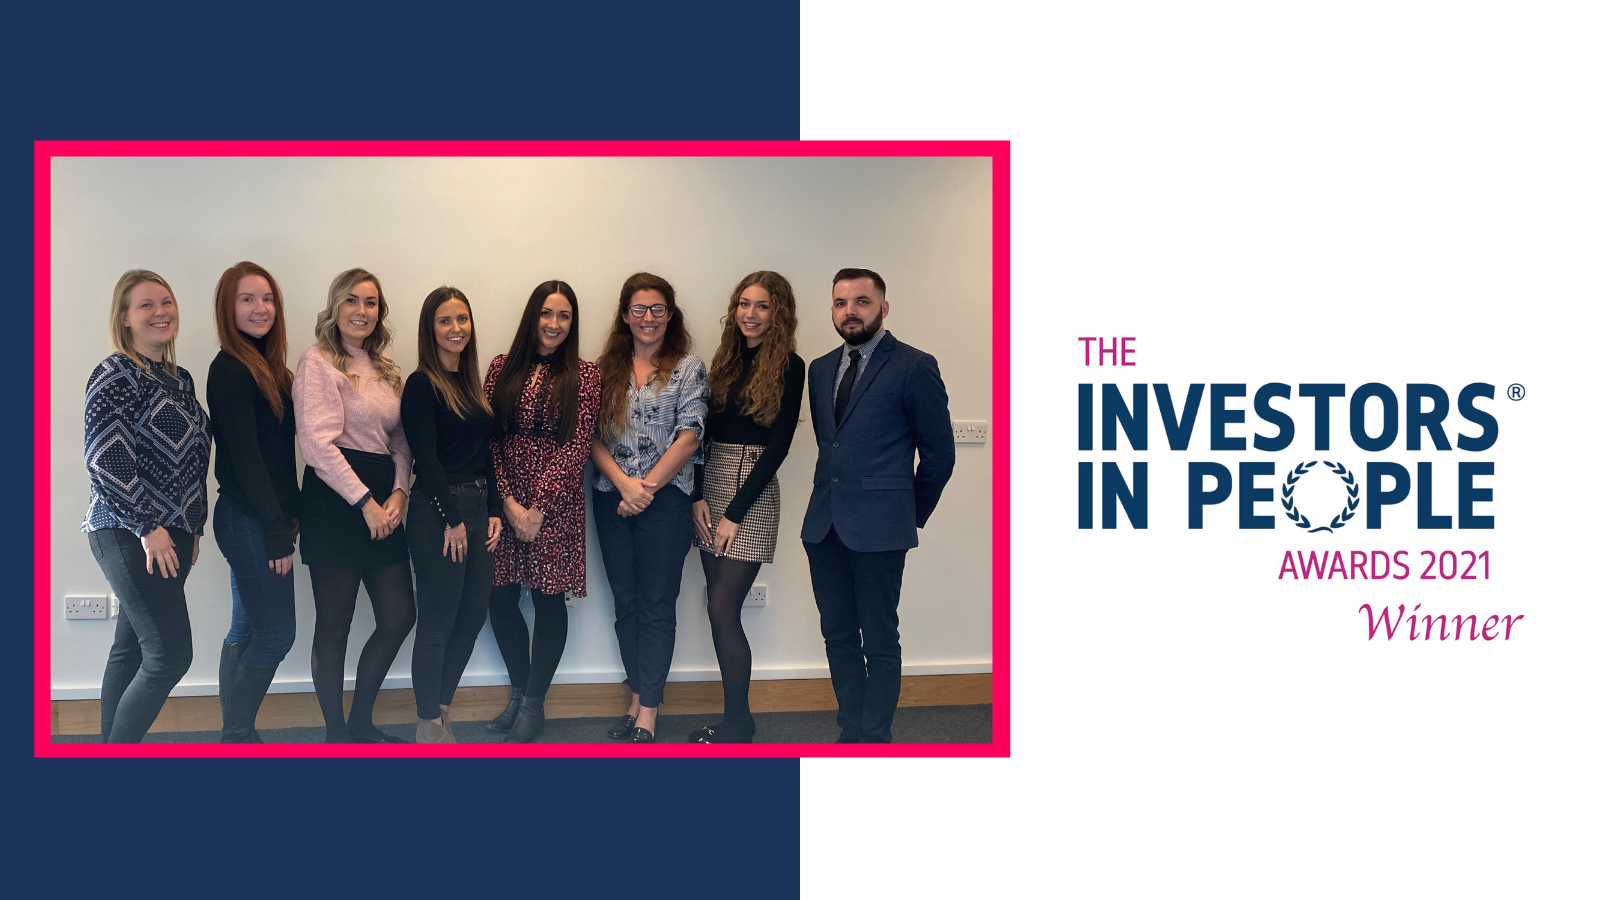 We’re the Investor in People Employer of the Year!